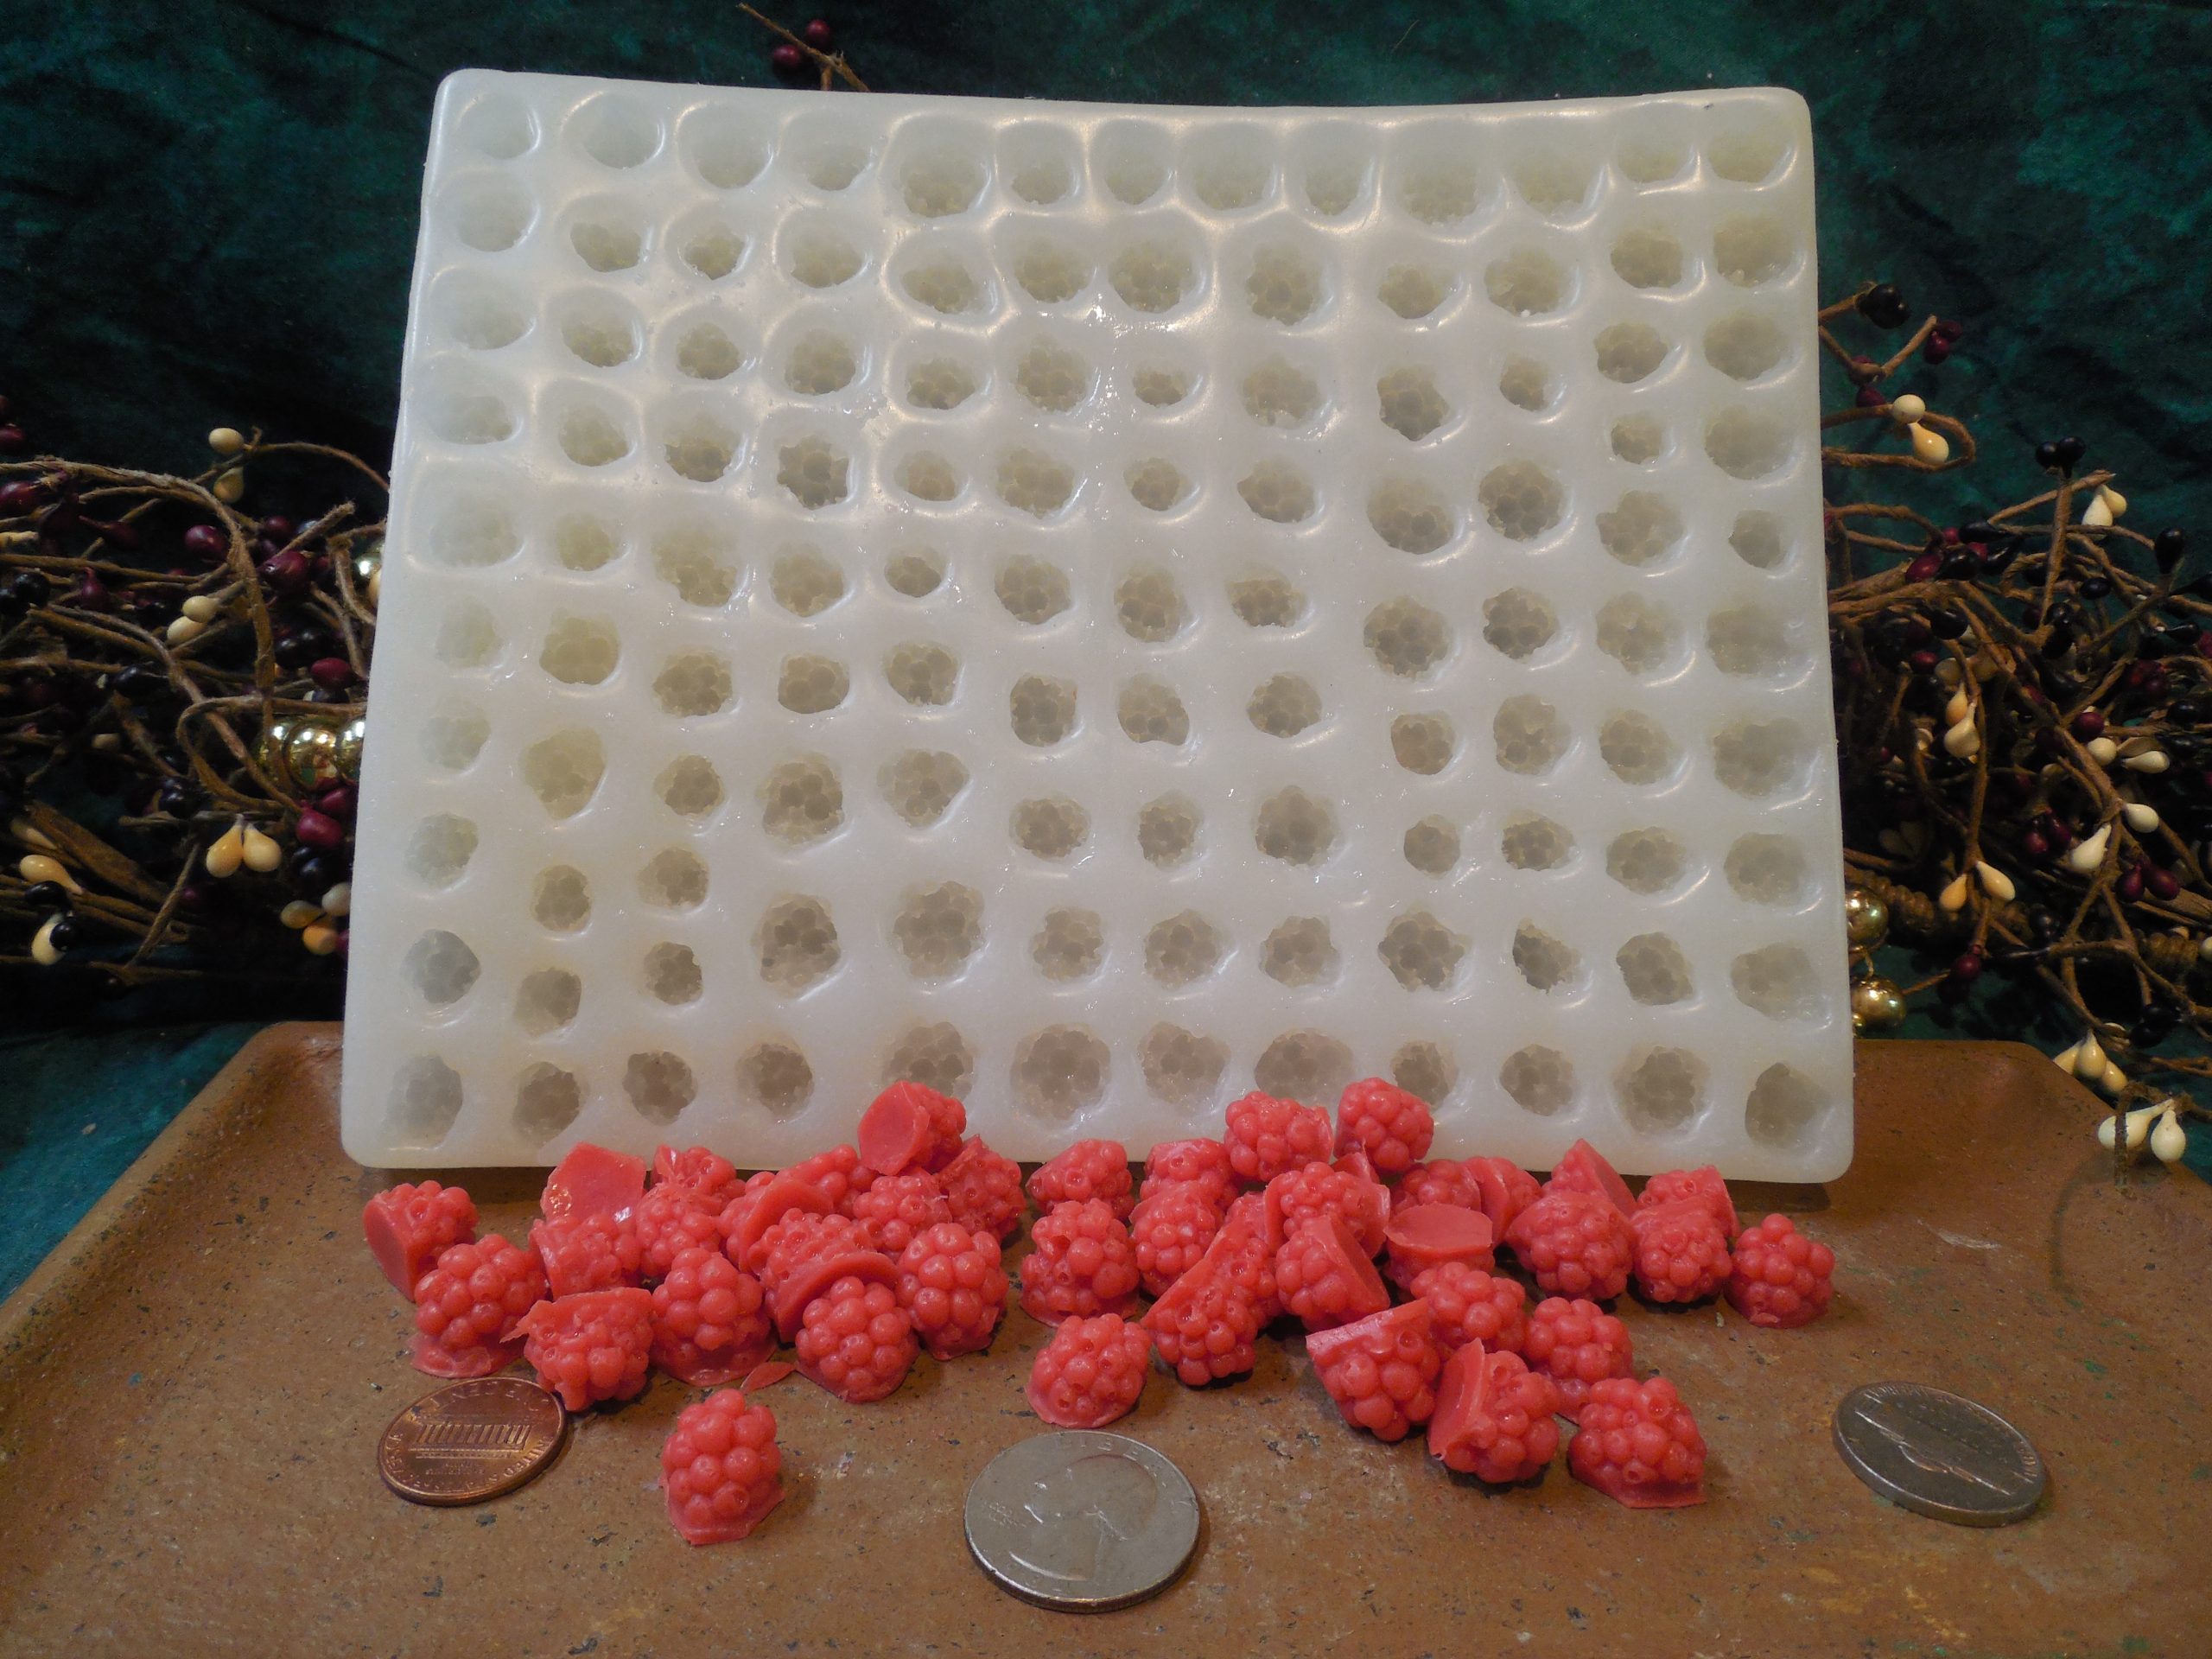 https://www.vanyulay.com/wp-content/uploads/2015/08/Raspberry-Mini-Silicone-Mold-scaled.jpg